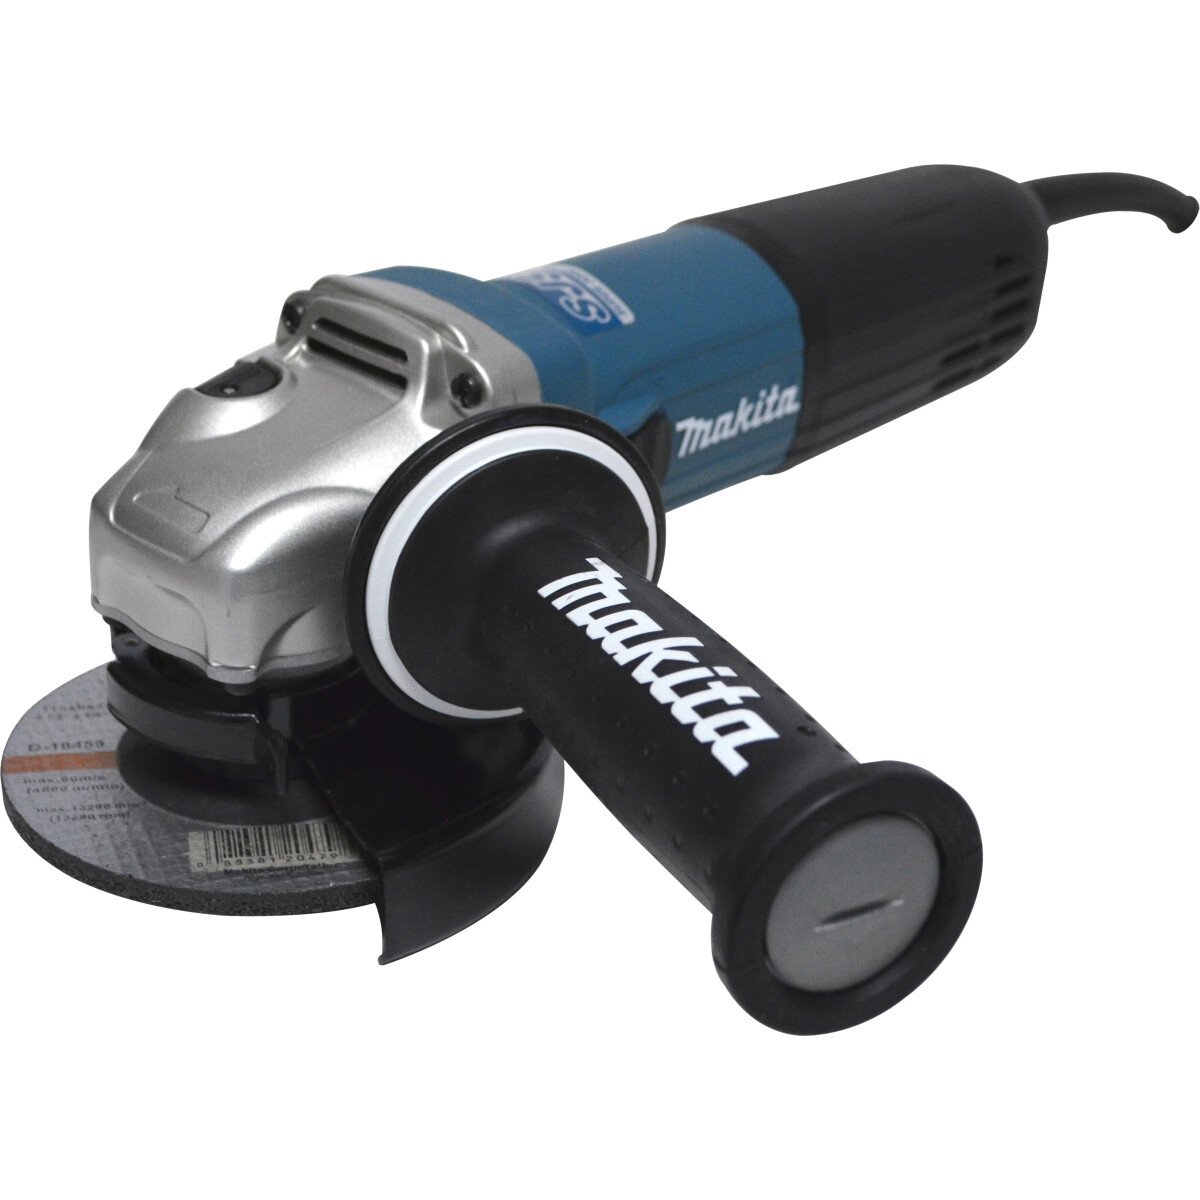 Makita GA5040R01 5" 240V 1100W (125mm) Angle Grinder with "Superjoint ll" and Anti Restart Protection